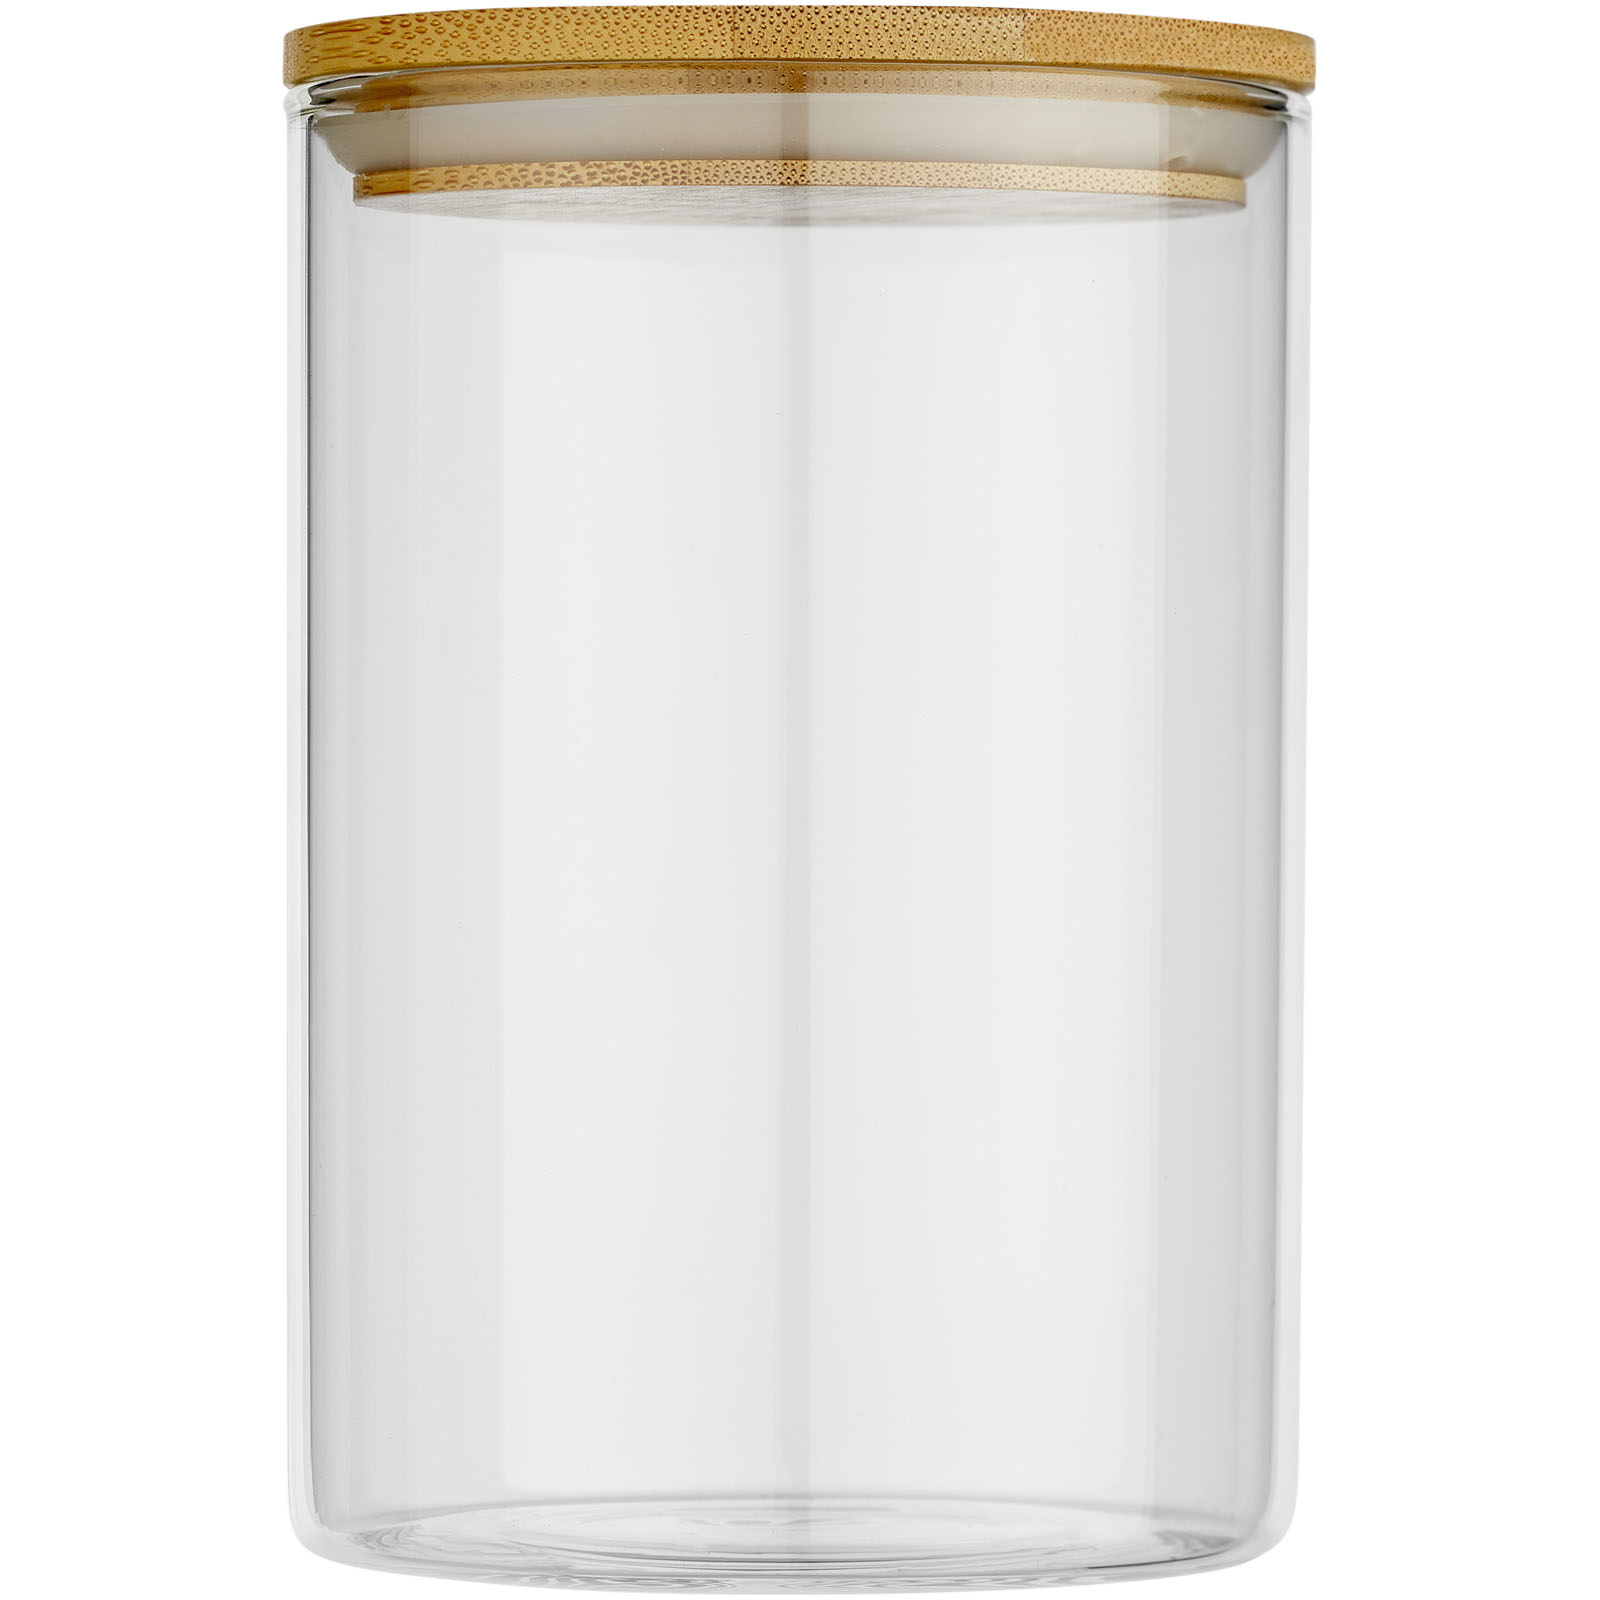 Advertising Kitchenware - Boley 550 ml glass food container - 3